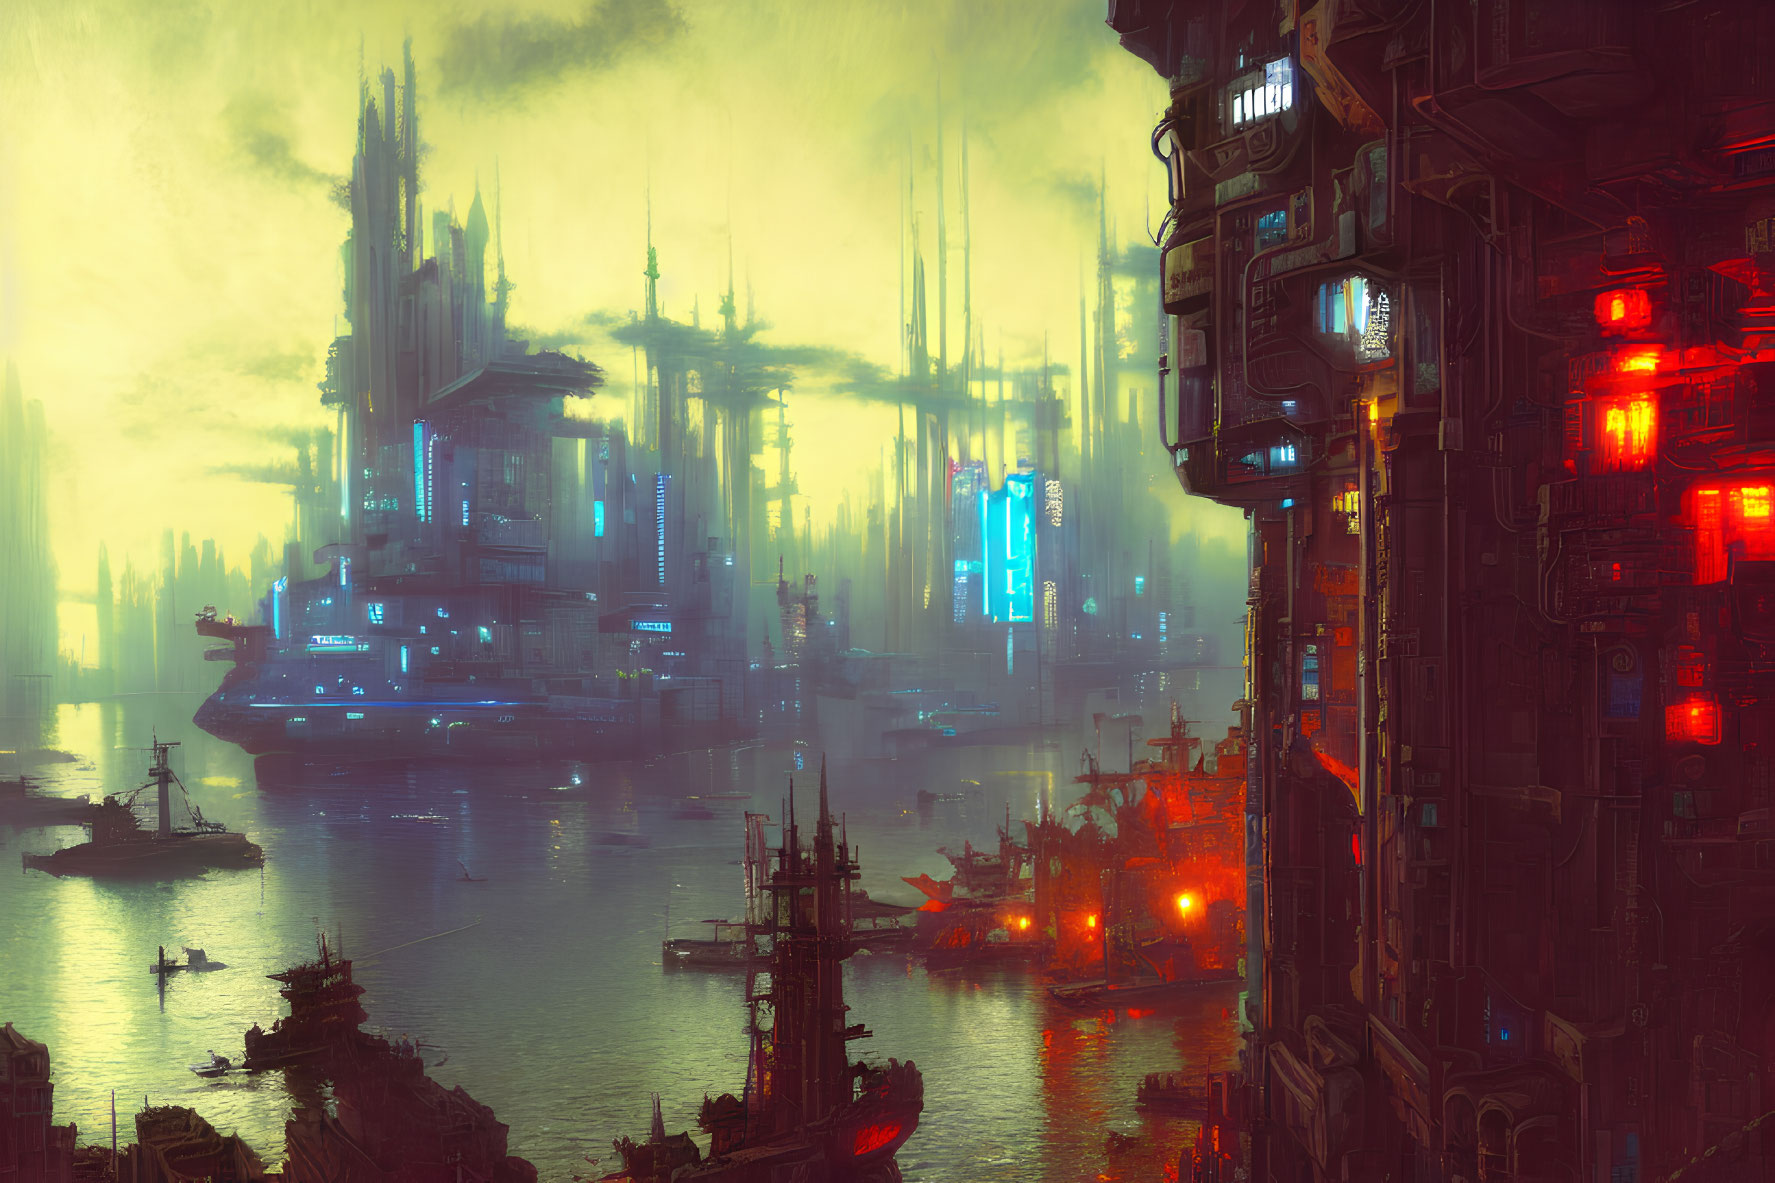 Futuristic cityscape with skyscrapers, neon signs, and floating ships above mist-covered water